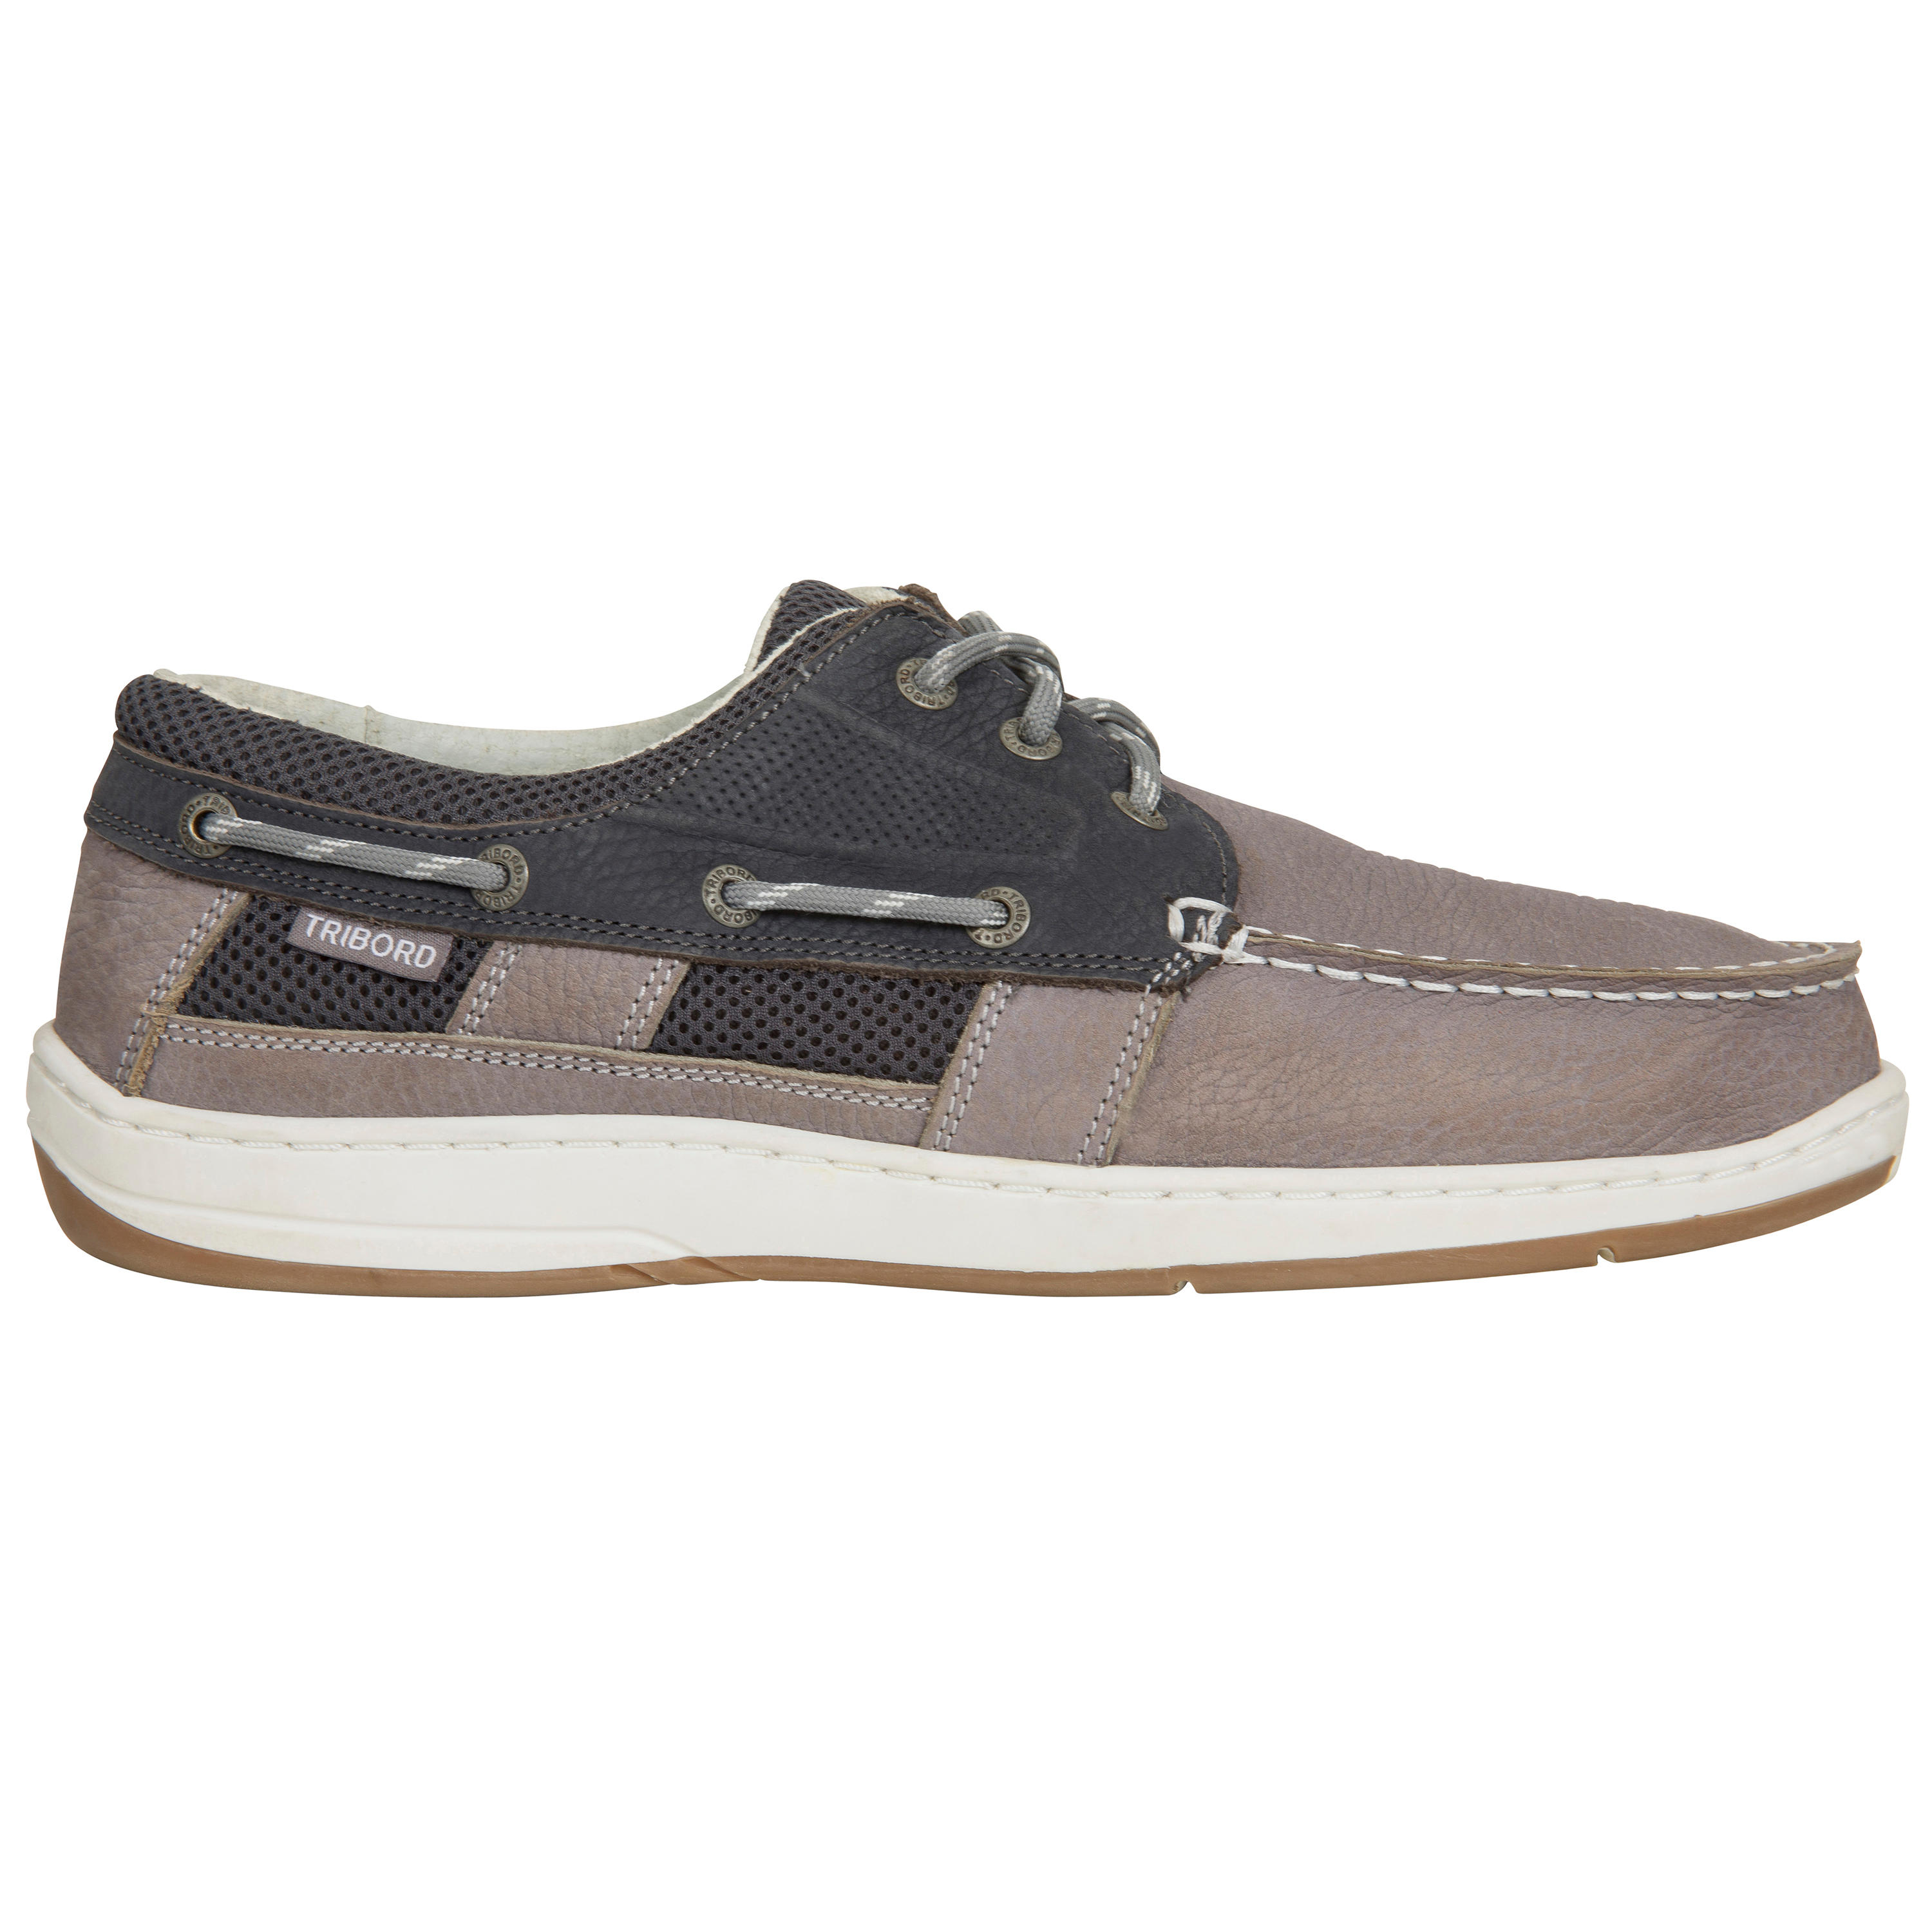 Men's Leather Boat Shoes CLIPPER - Grey 4/9